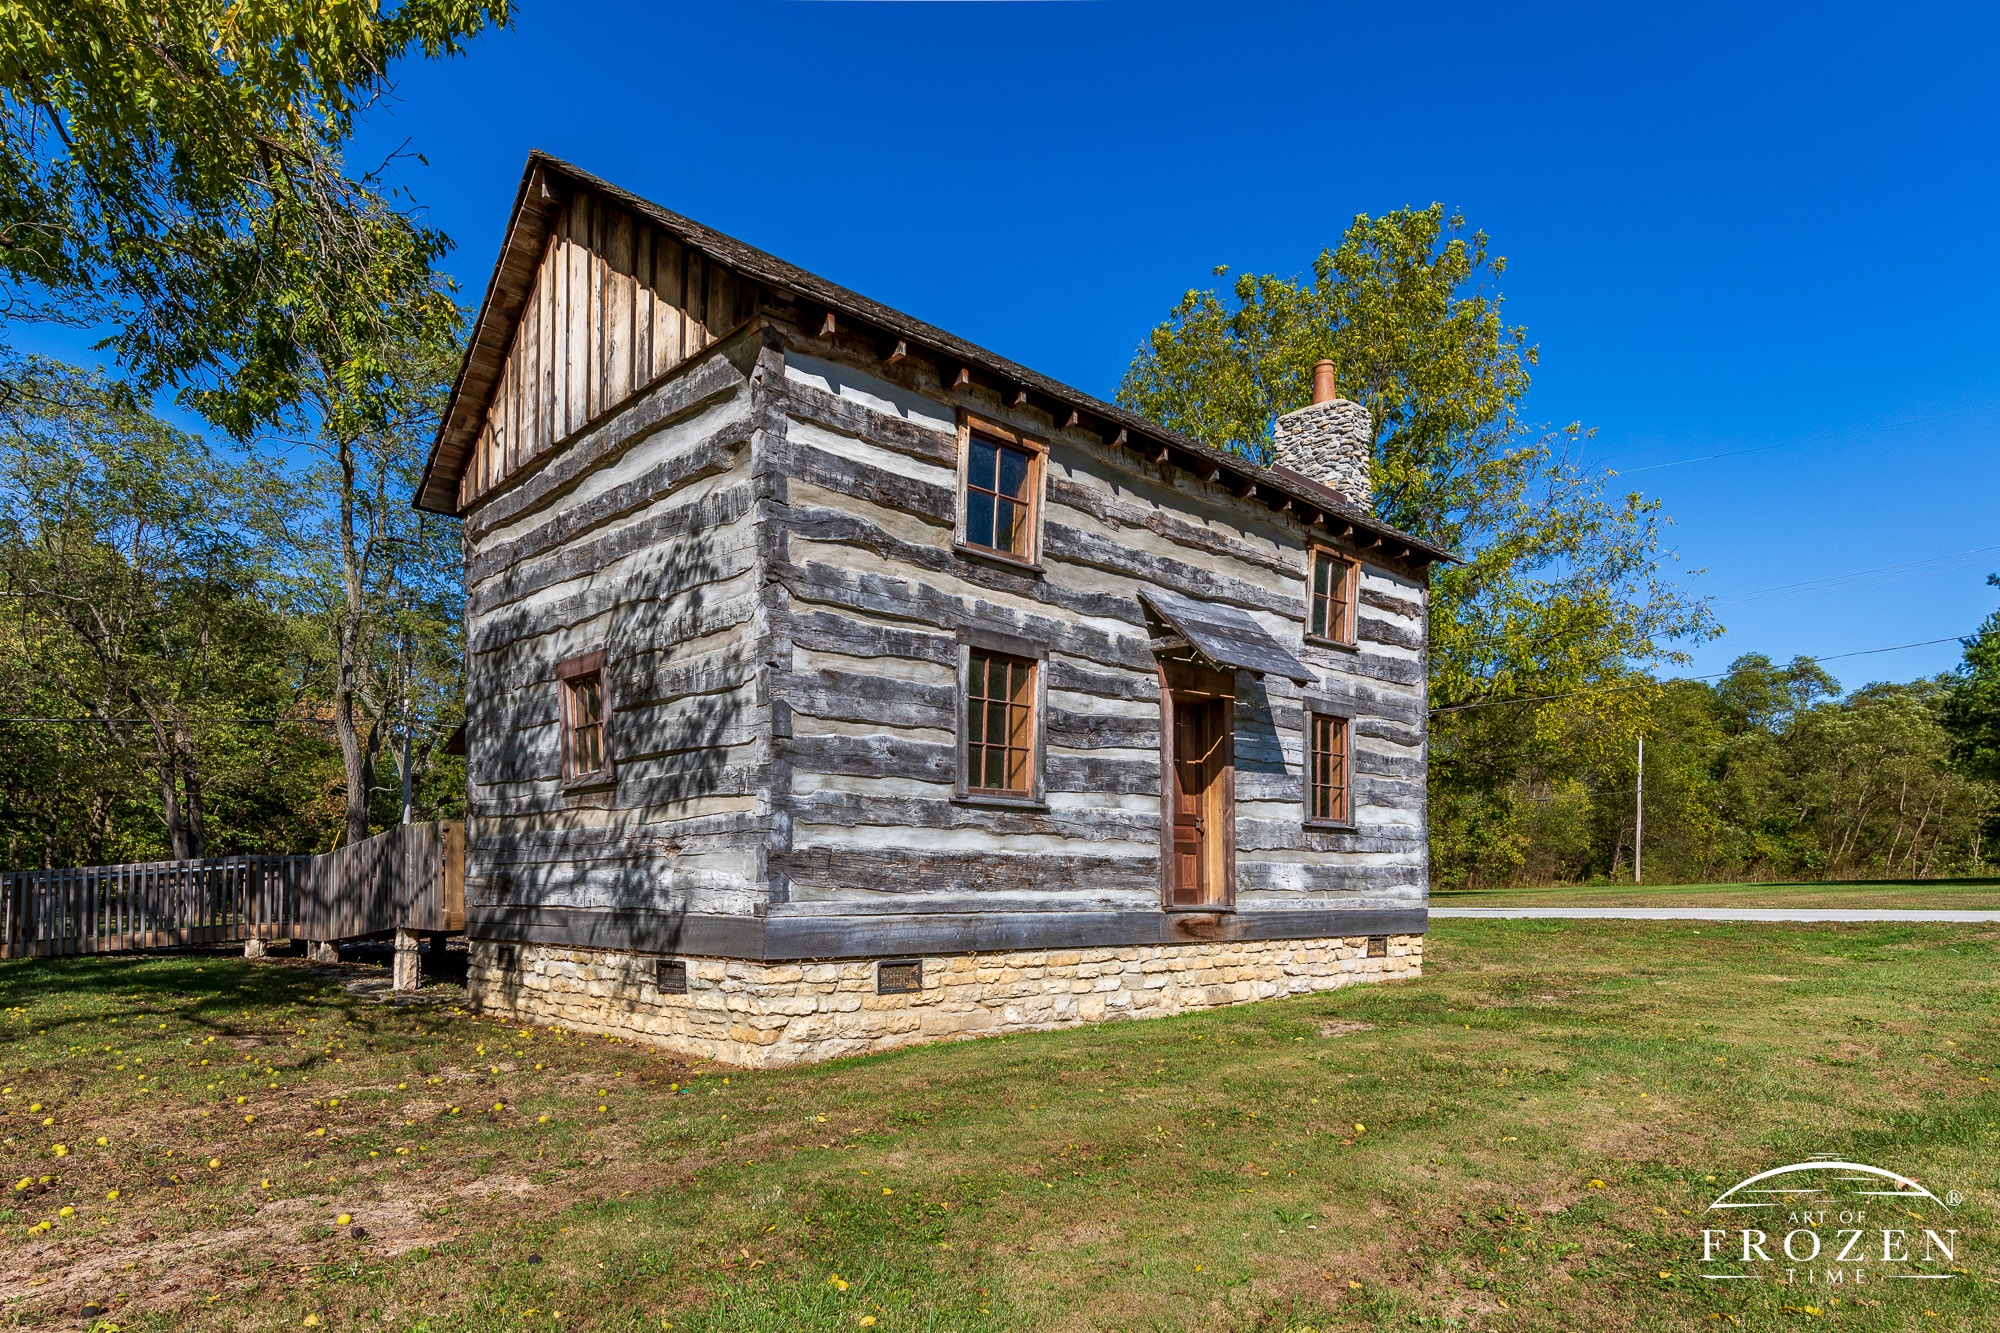 A renovated log home near Cedarville, Ohio basking in the evening sunlight under blue October skies